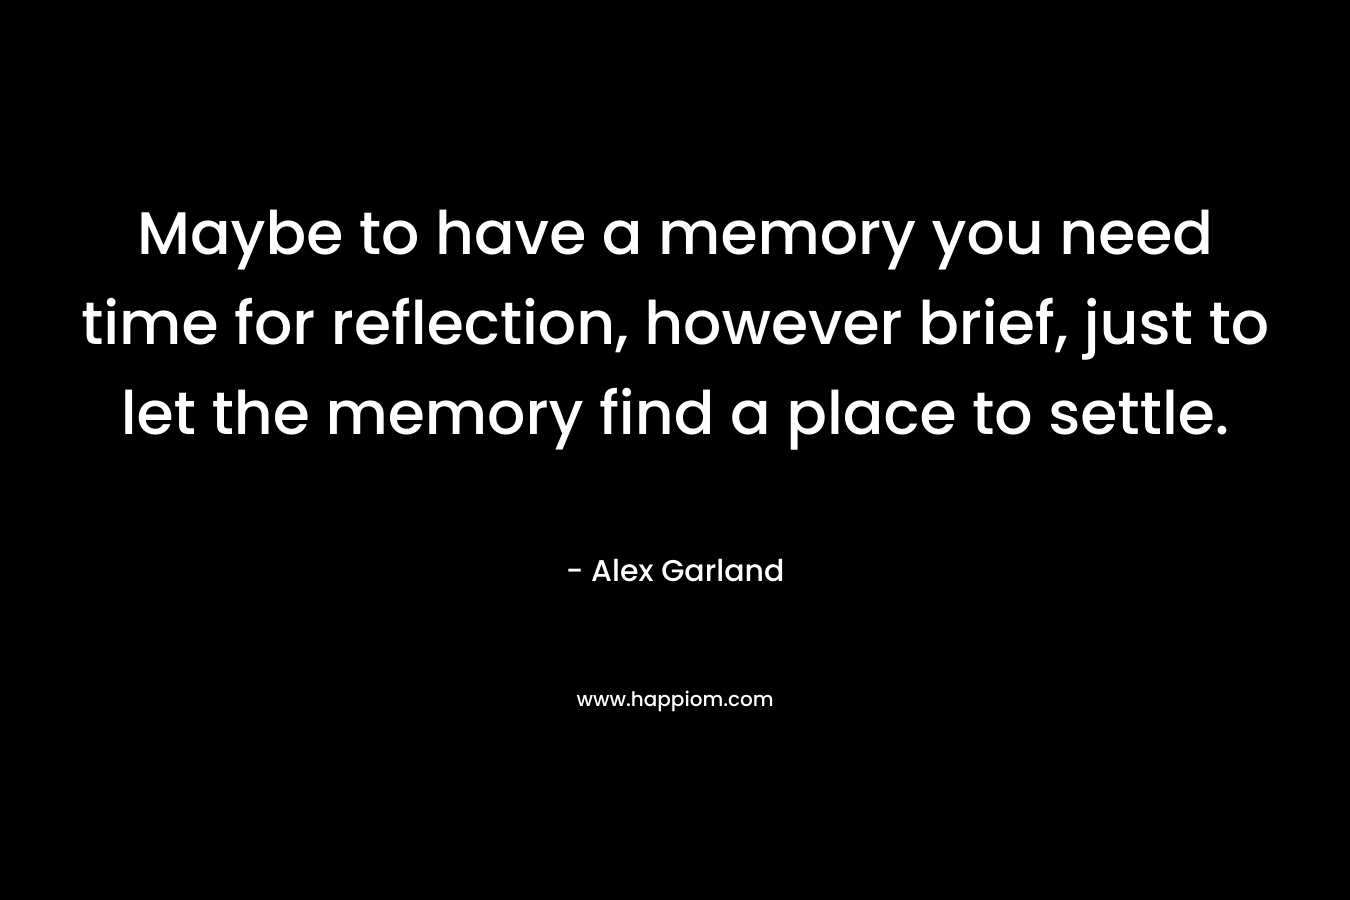 Maybe to have a memory you need time for reflection, however brief, just to let the memory find a place to settle.